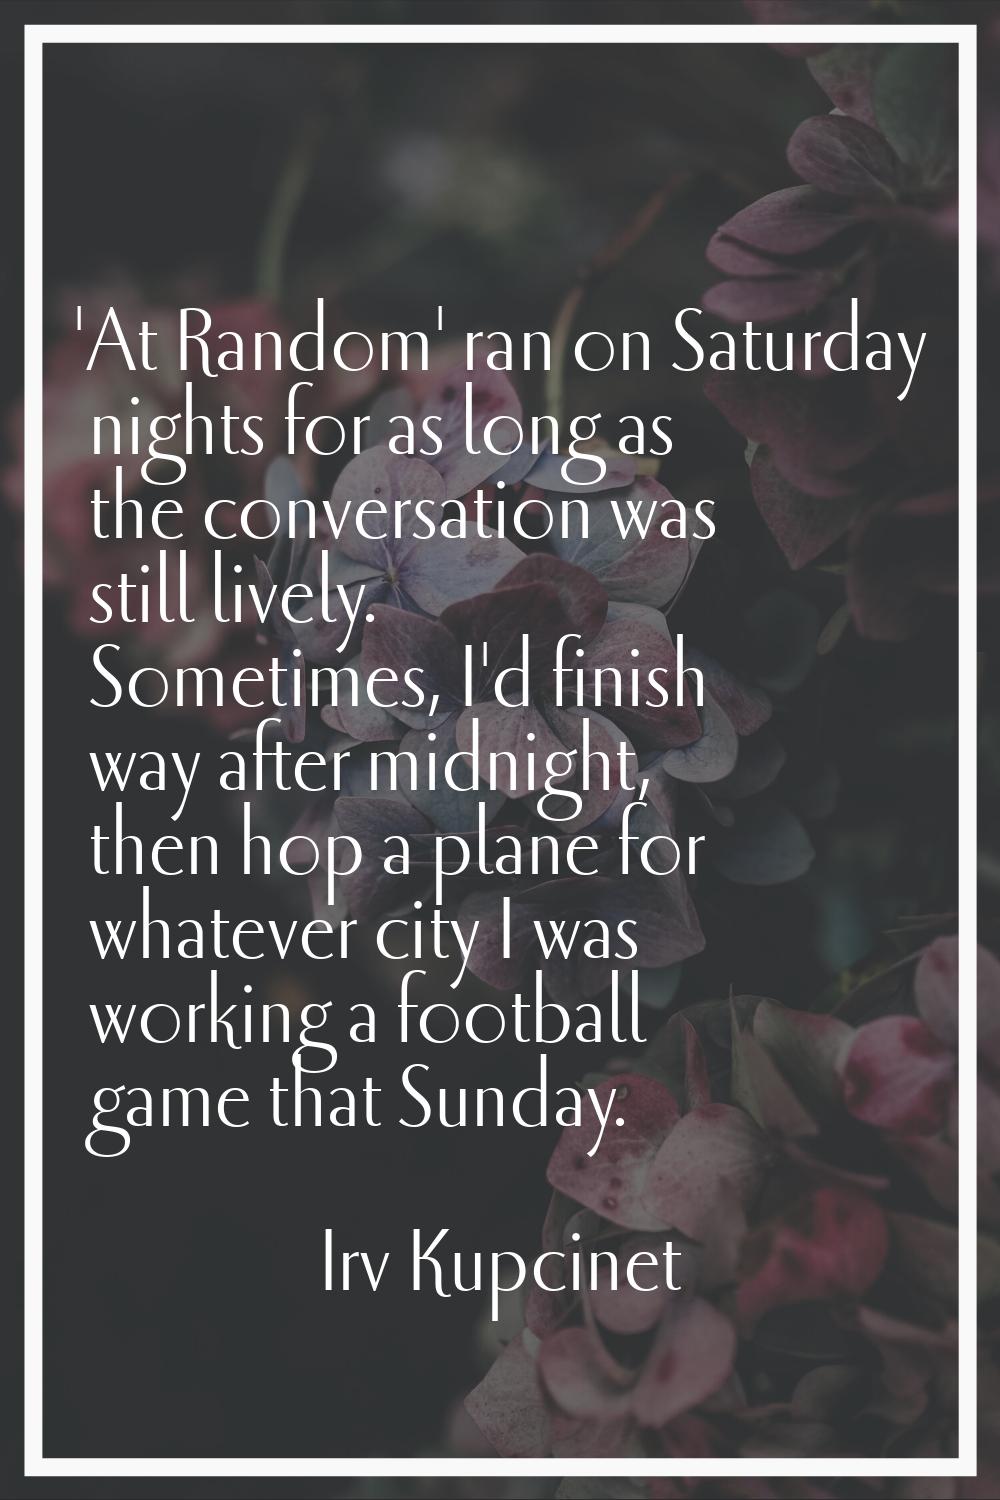 'At Random' ran on Saturday nights for as long as the conversation was still lively. Sometimes, I'd